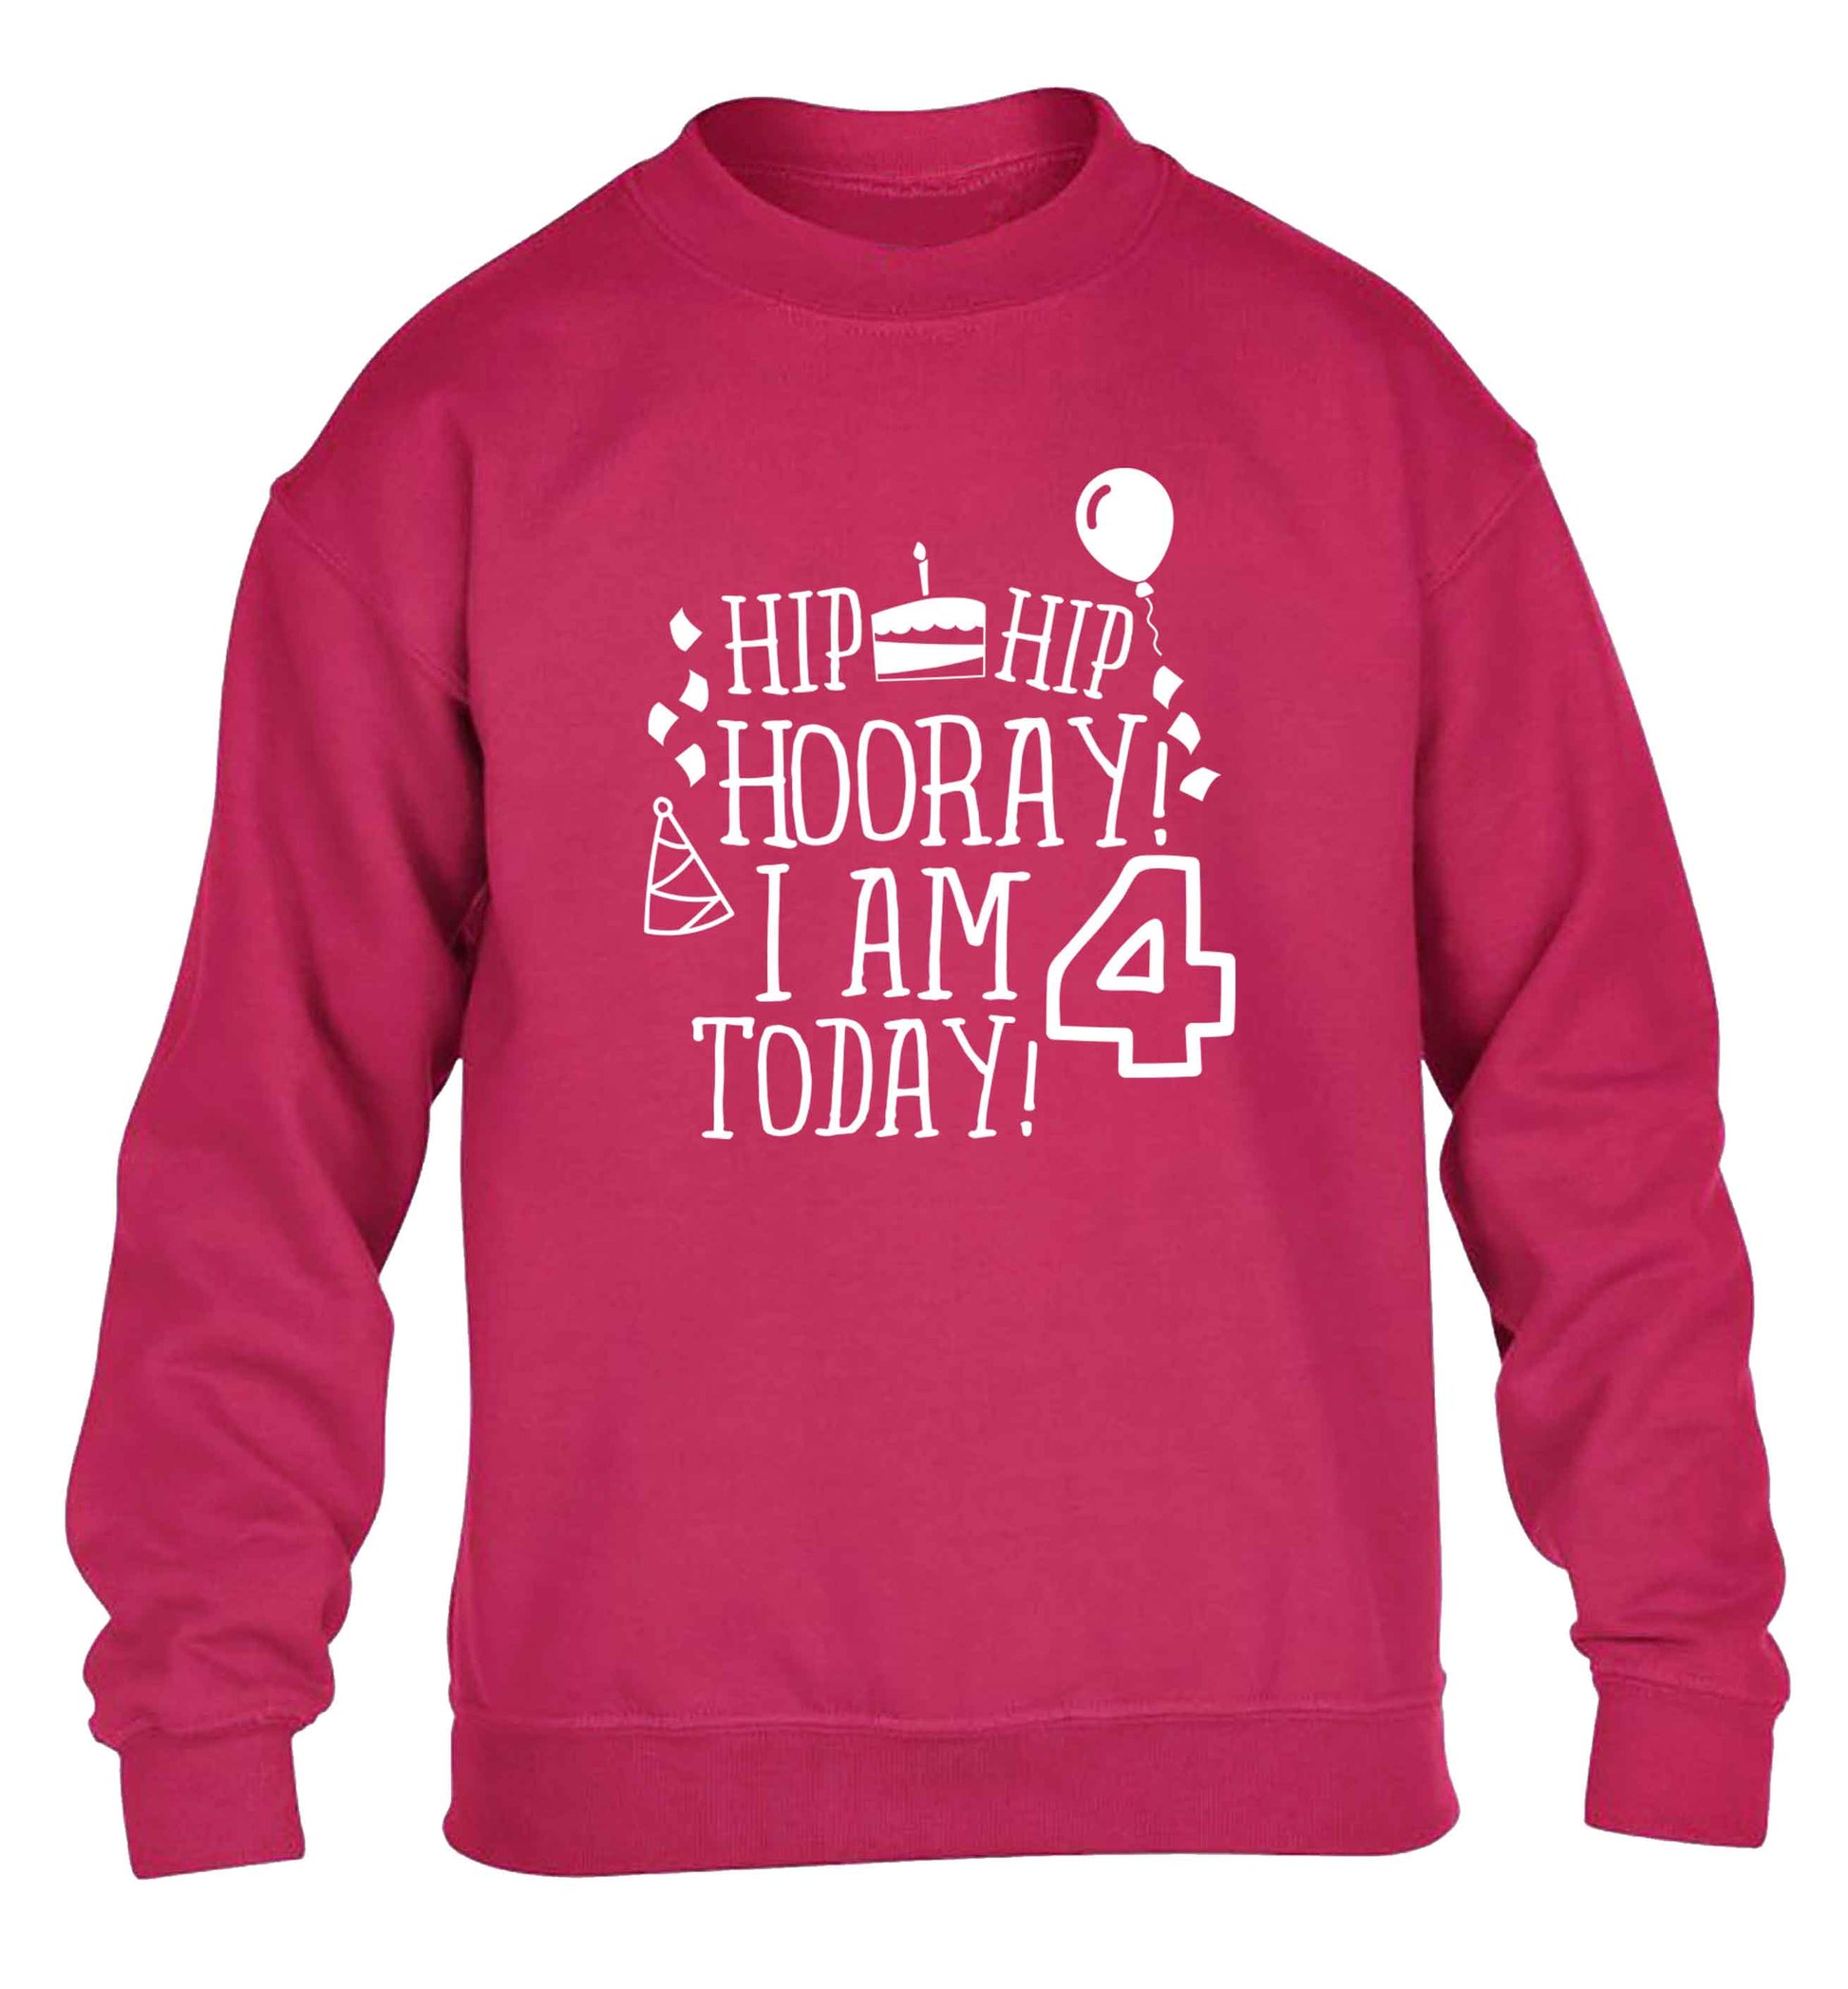 Hip hip hooray I am four today! children's pink sweater 12-13 Years